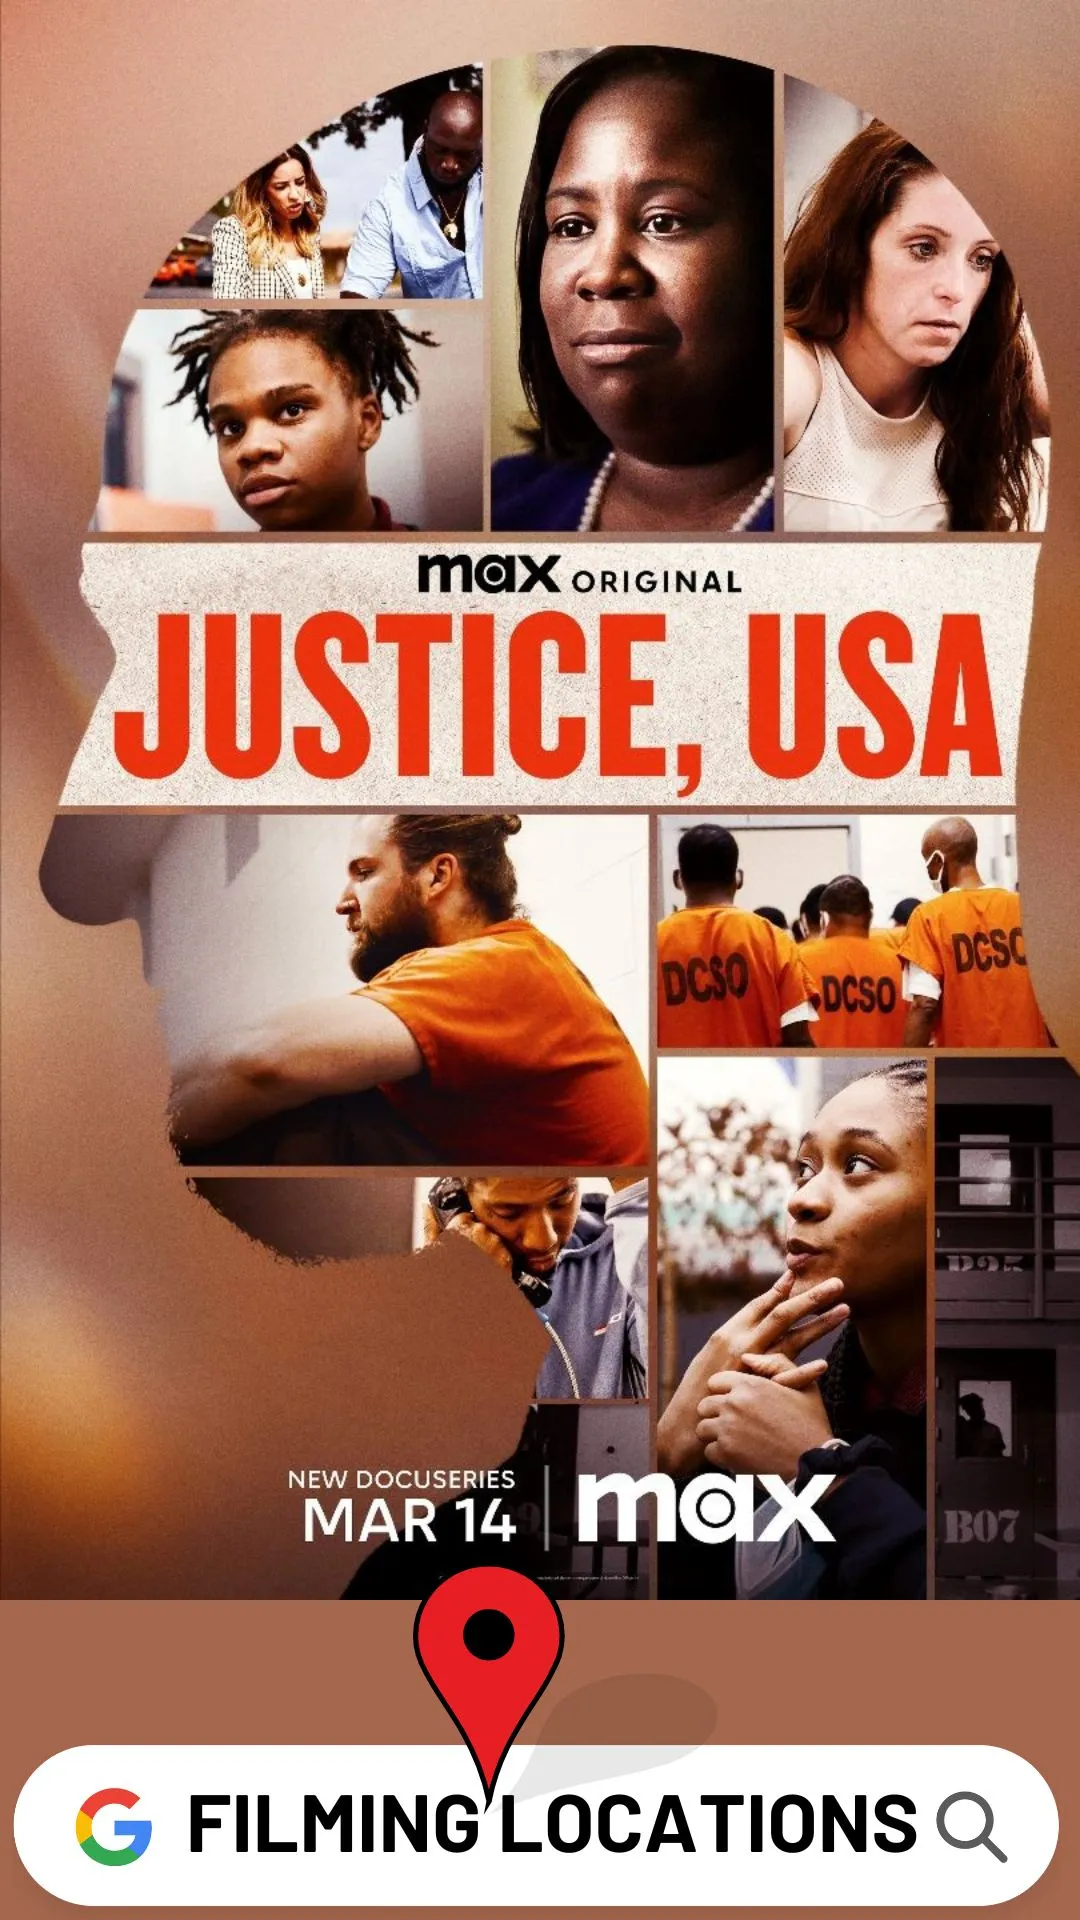 Justice USA Filming Locations